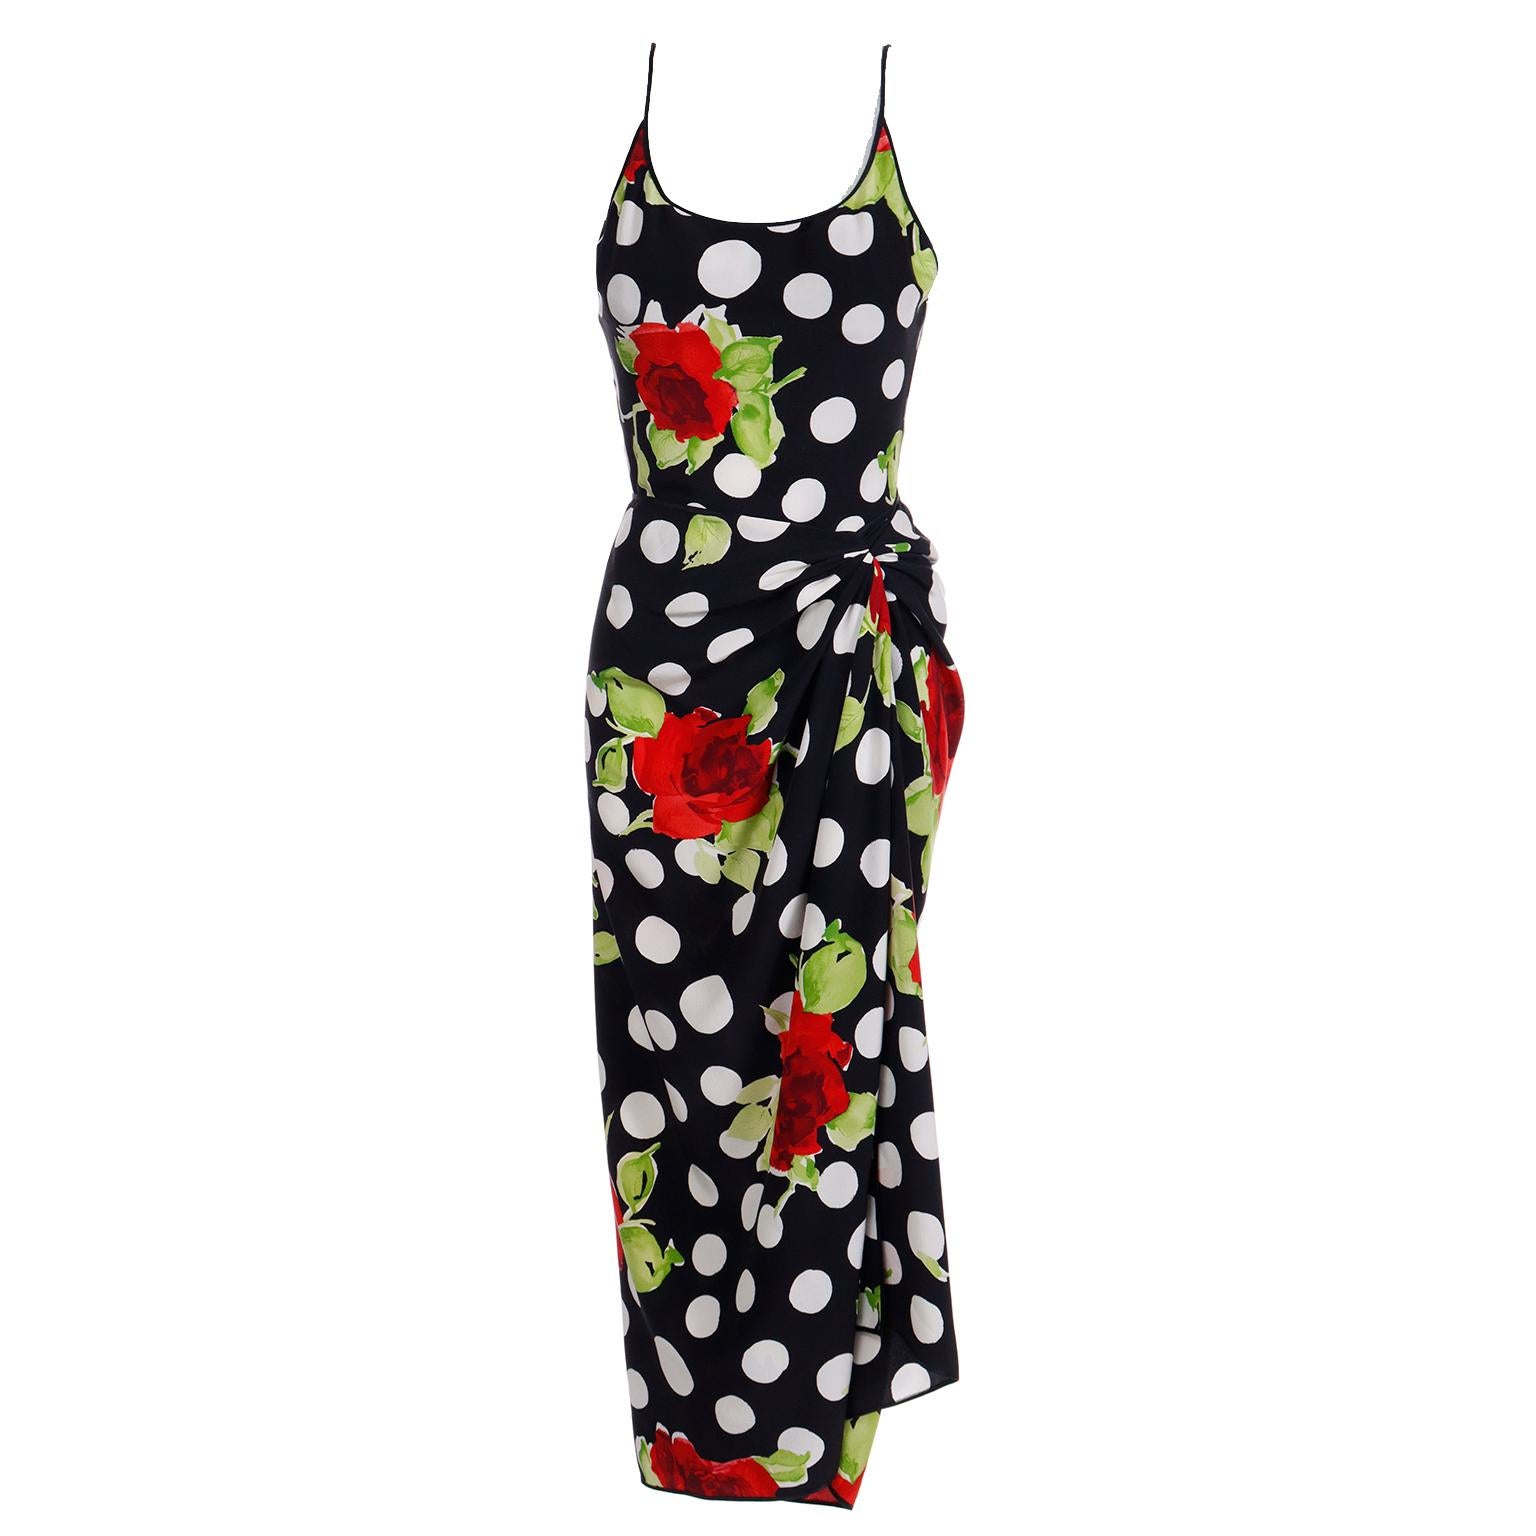 This is a gorgeous James Galanos vintage 2 piece silk outfit that includes a bodysuit and a wrap sarong style skirt. The print is a black and white polka dot with red roses and green leaves. The scoop neck one piece bodysuit has built in bra cups